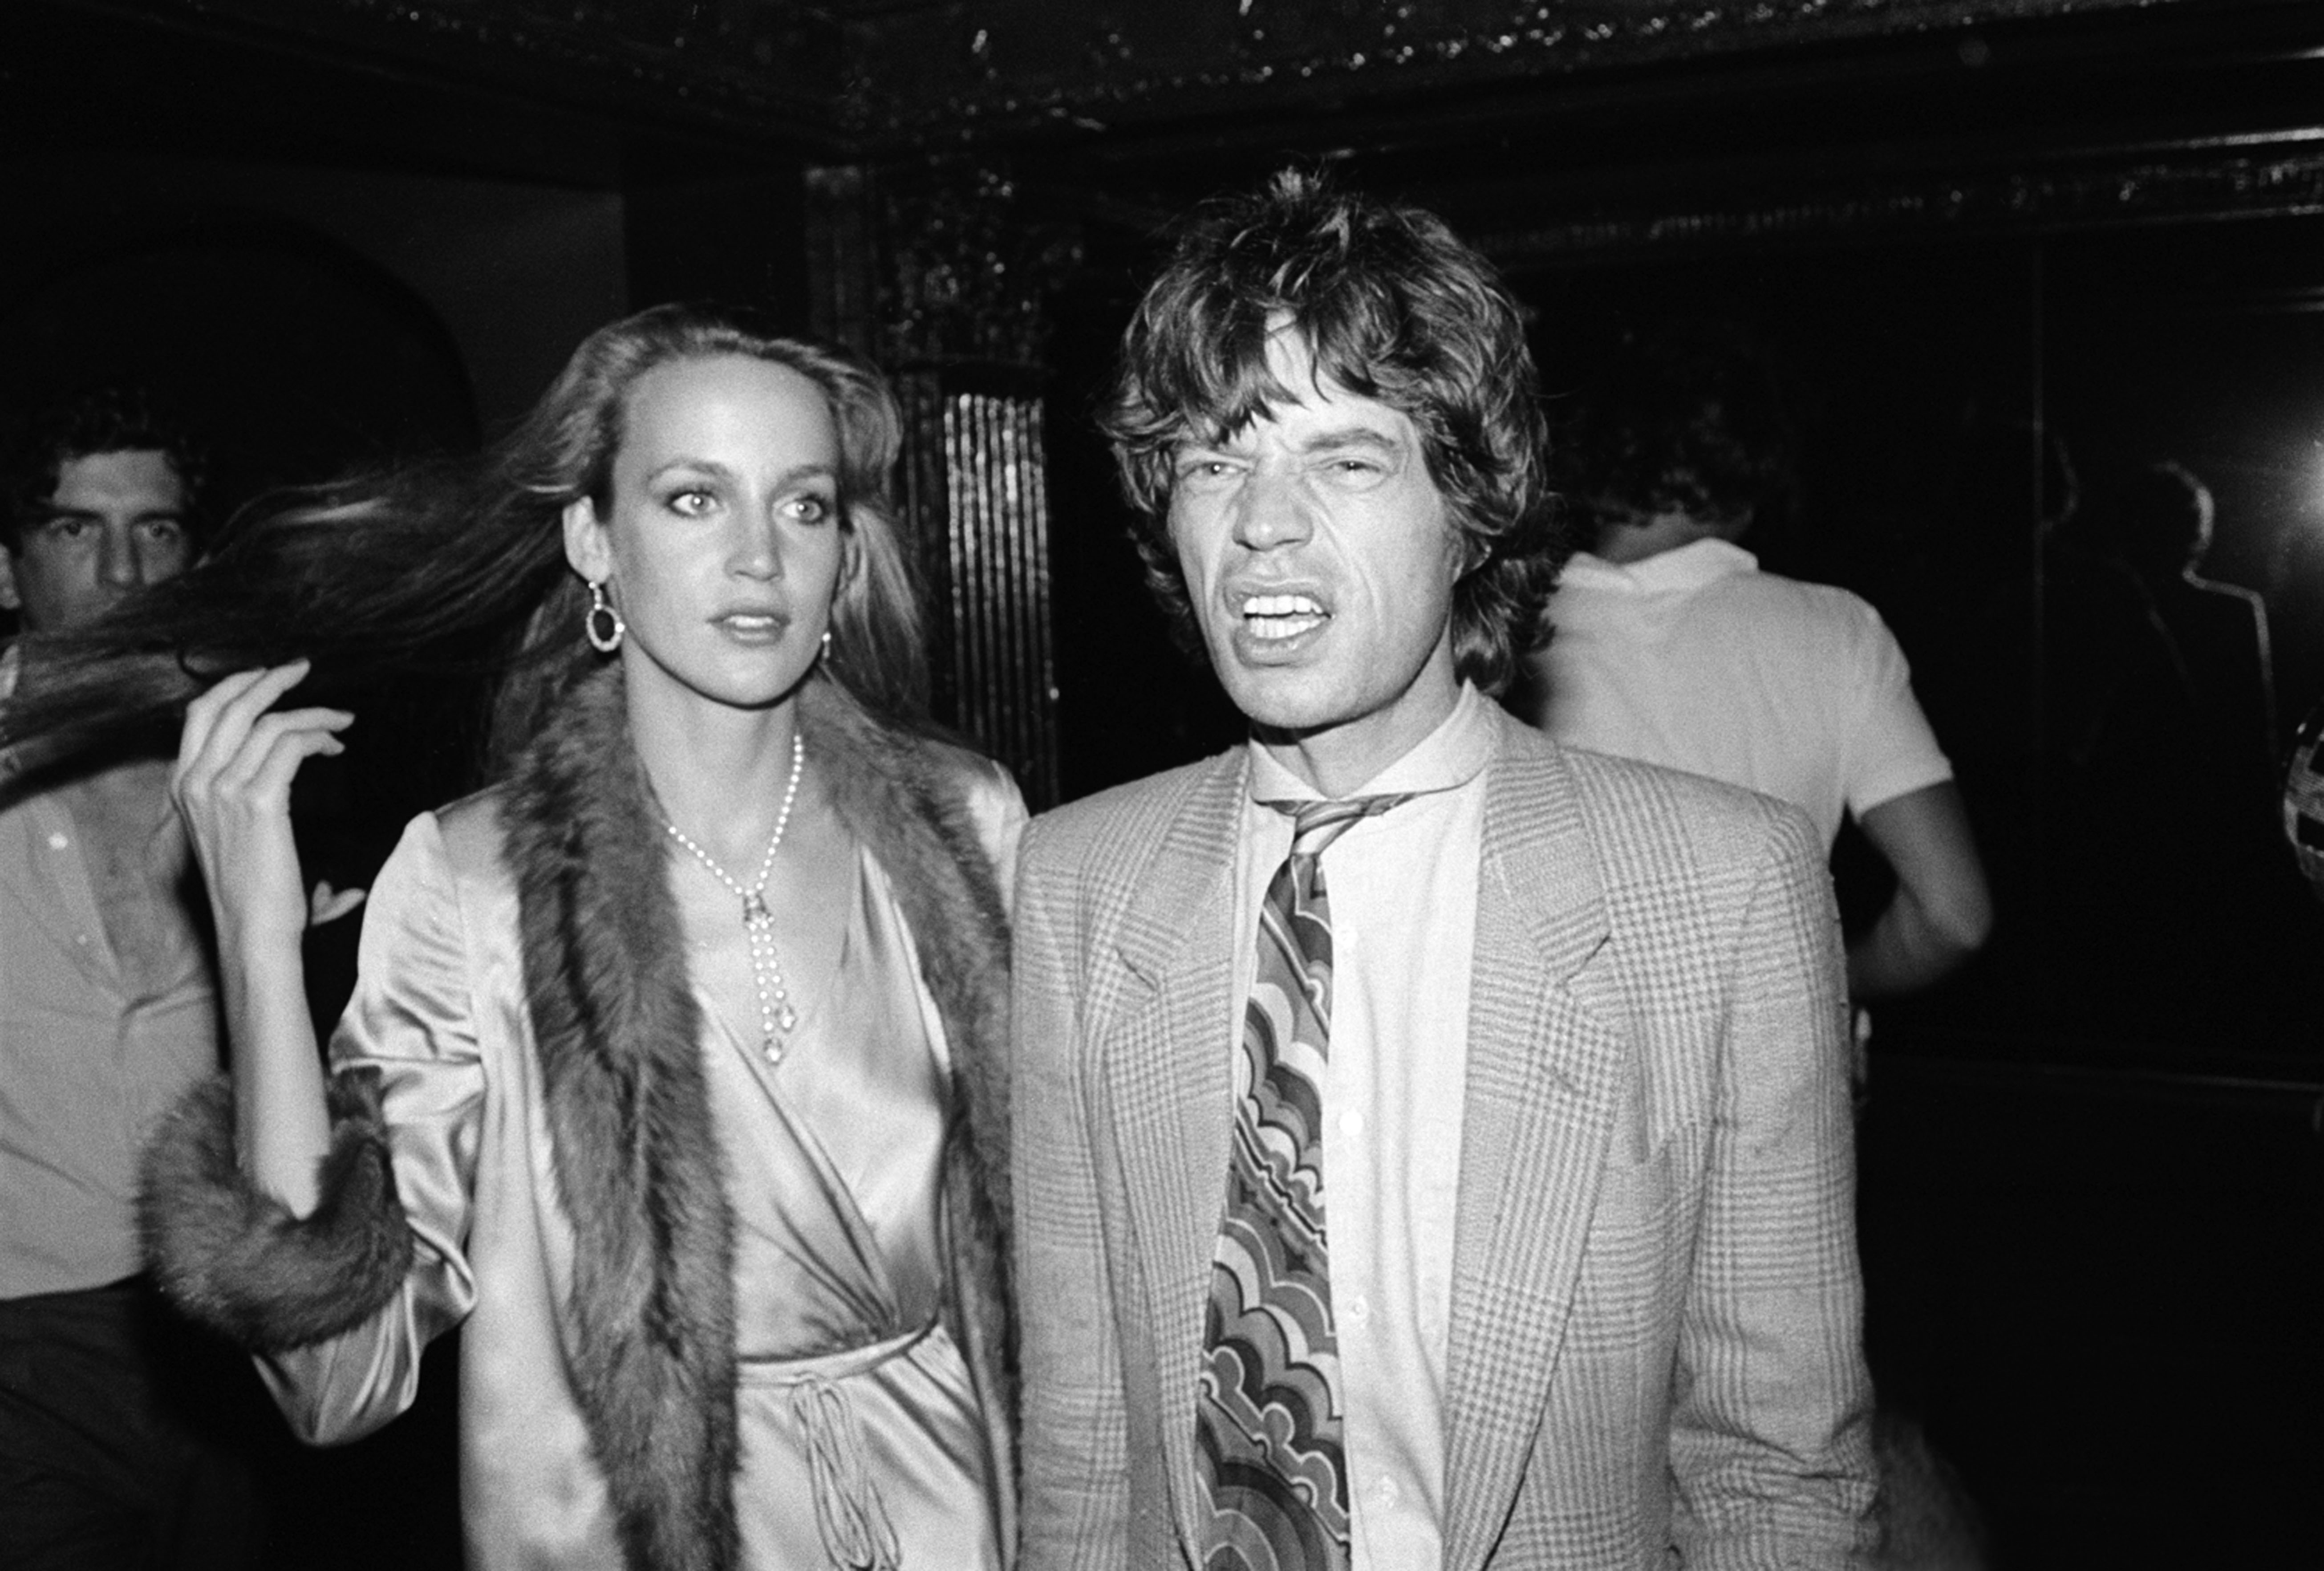 Jerry Hall flips his hair back in a fur-lined jacket with Mick Jagger at studio 54